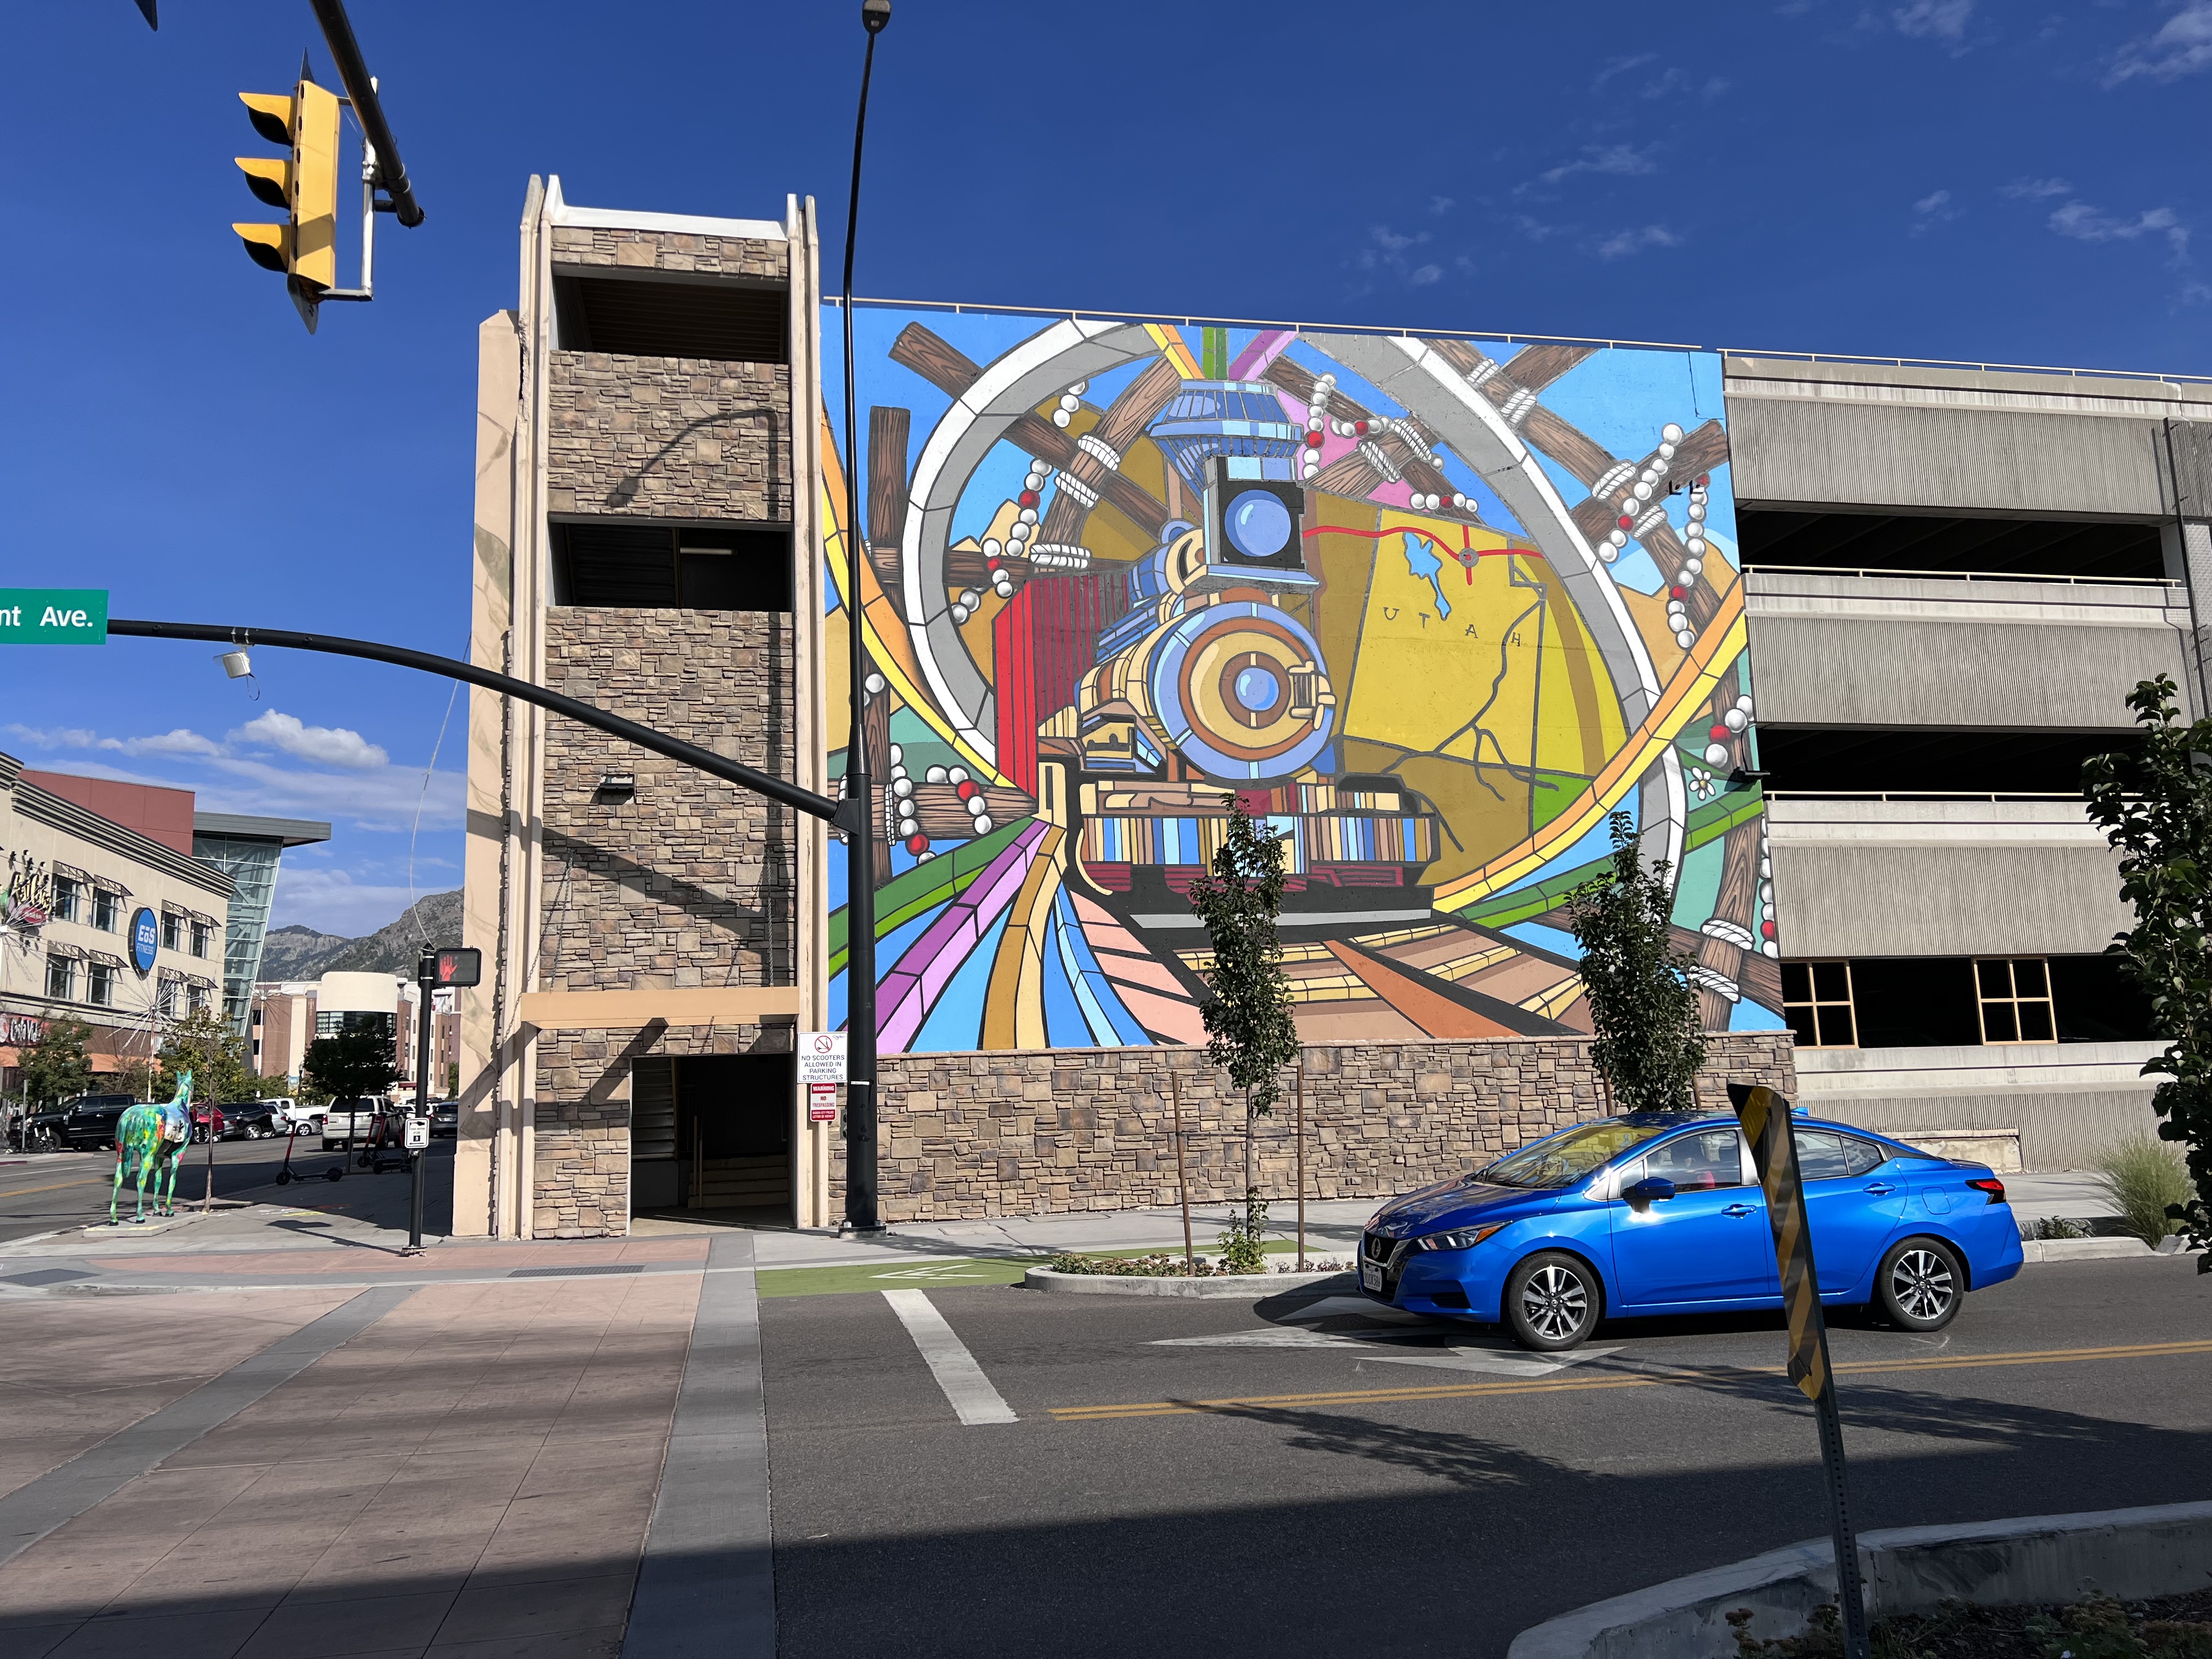 photo of a mural and car in the cool photographic style